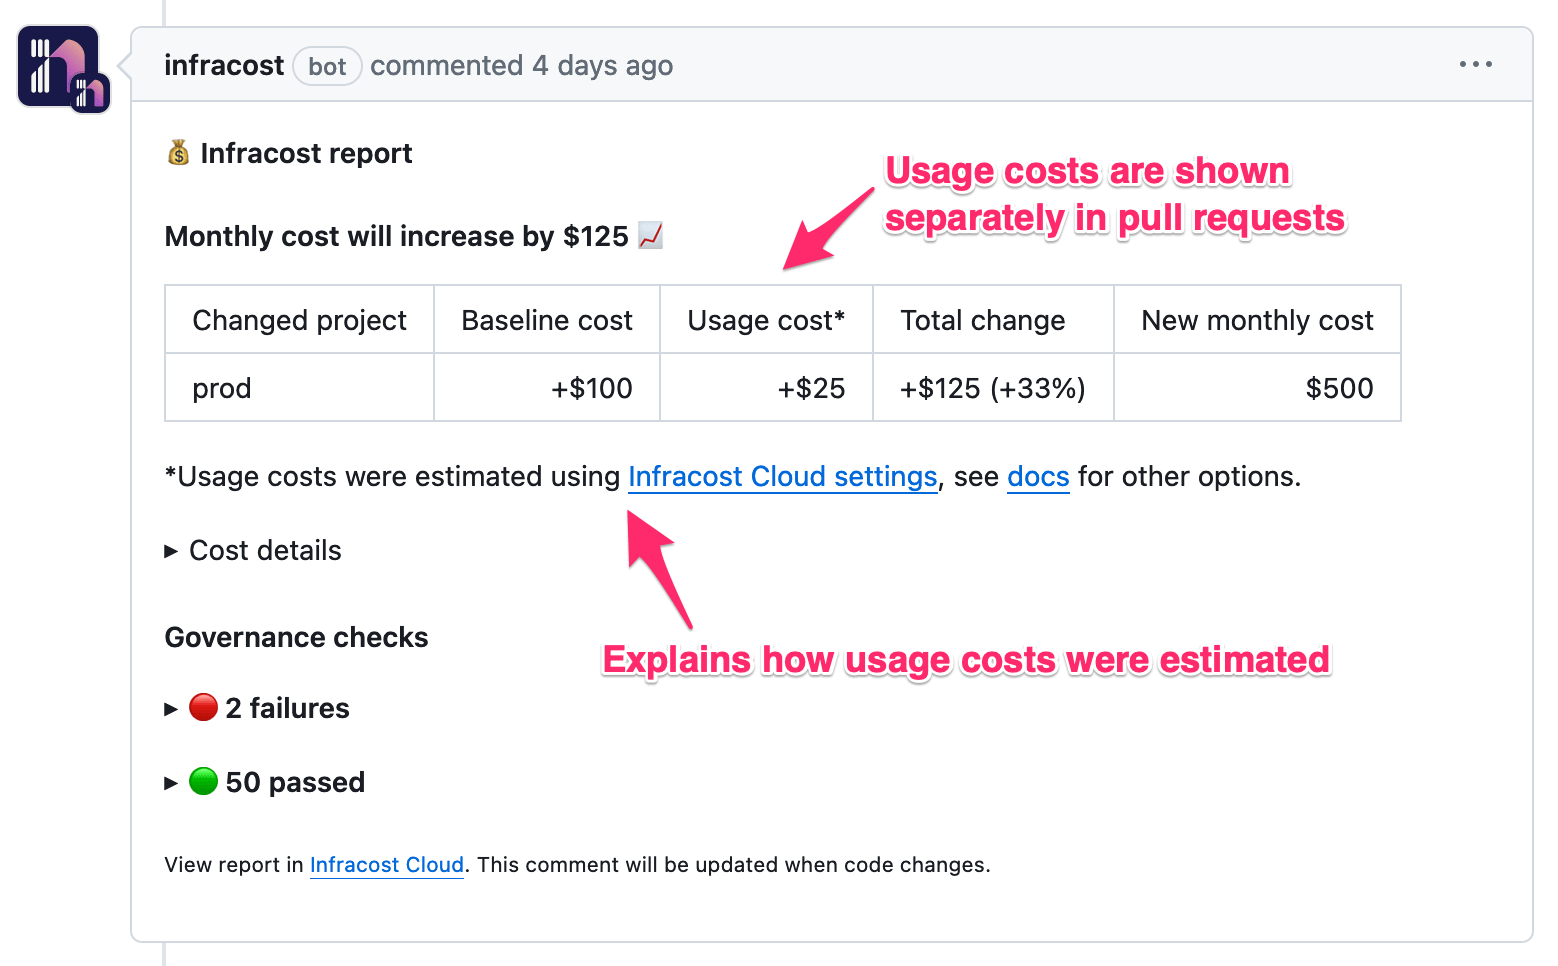 Usage costs in pull requests